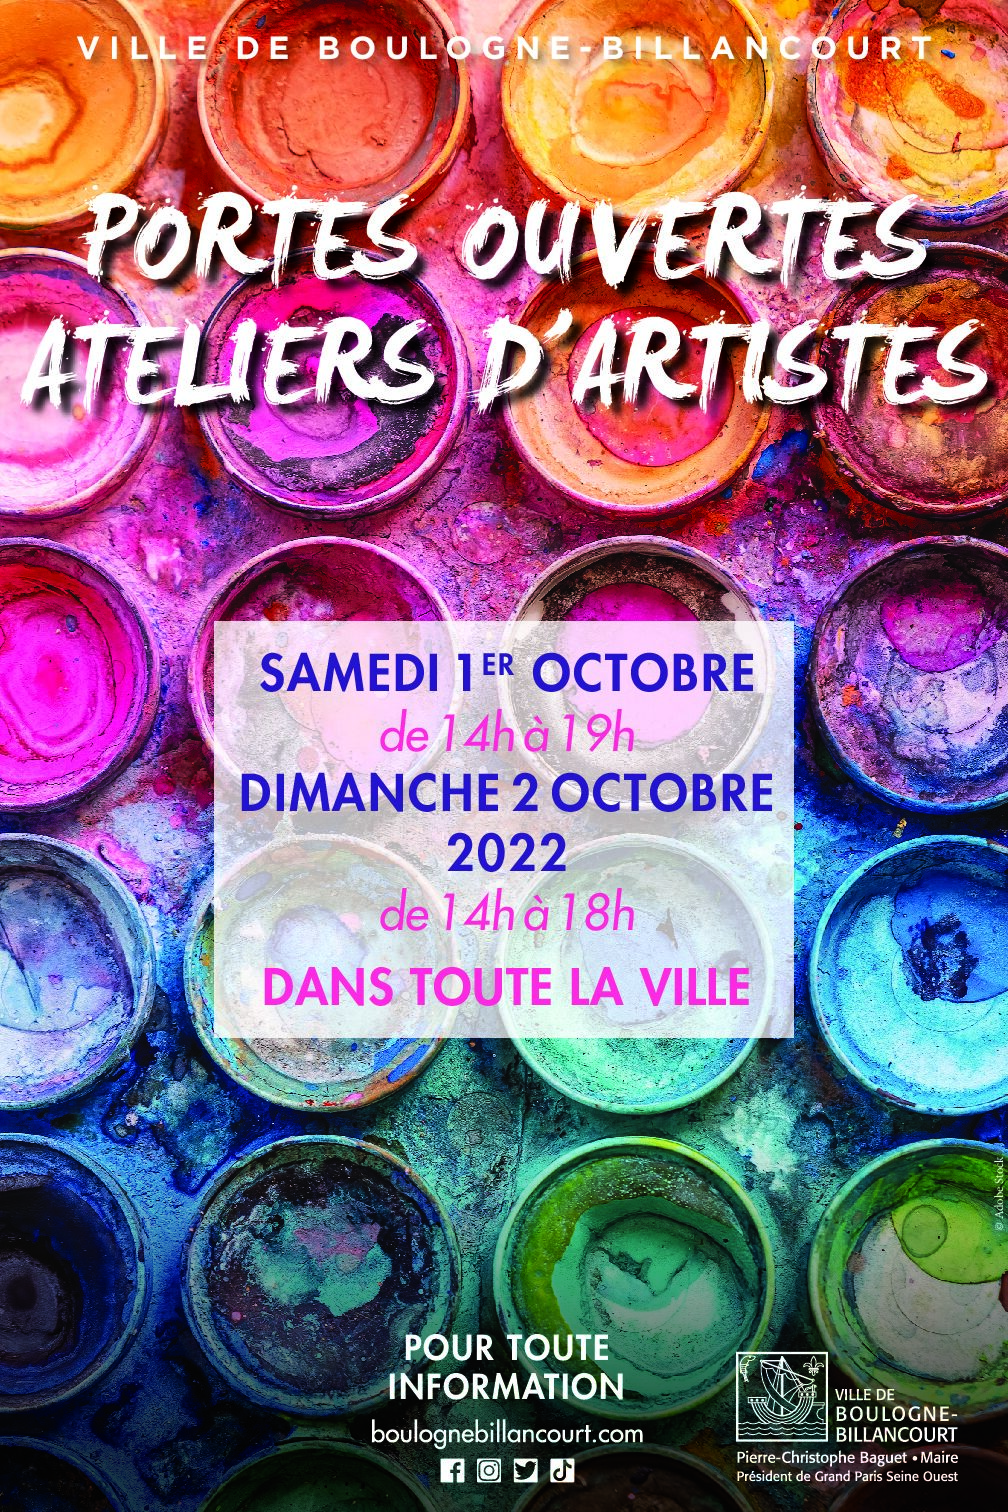 You are currently viewing Portes ouvertes Ateliers d’Artistes